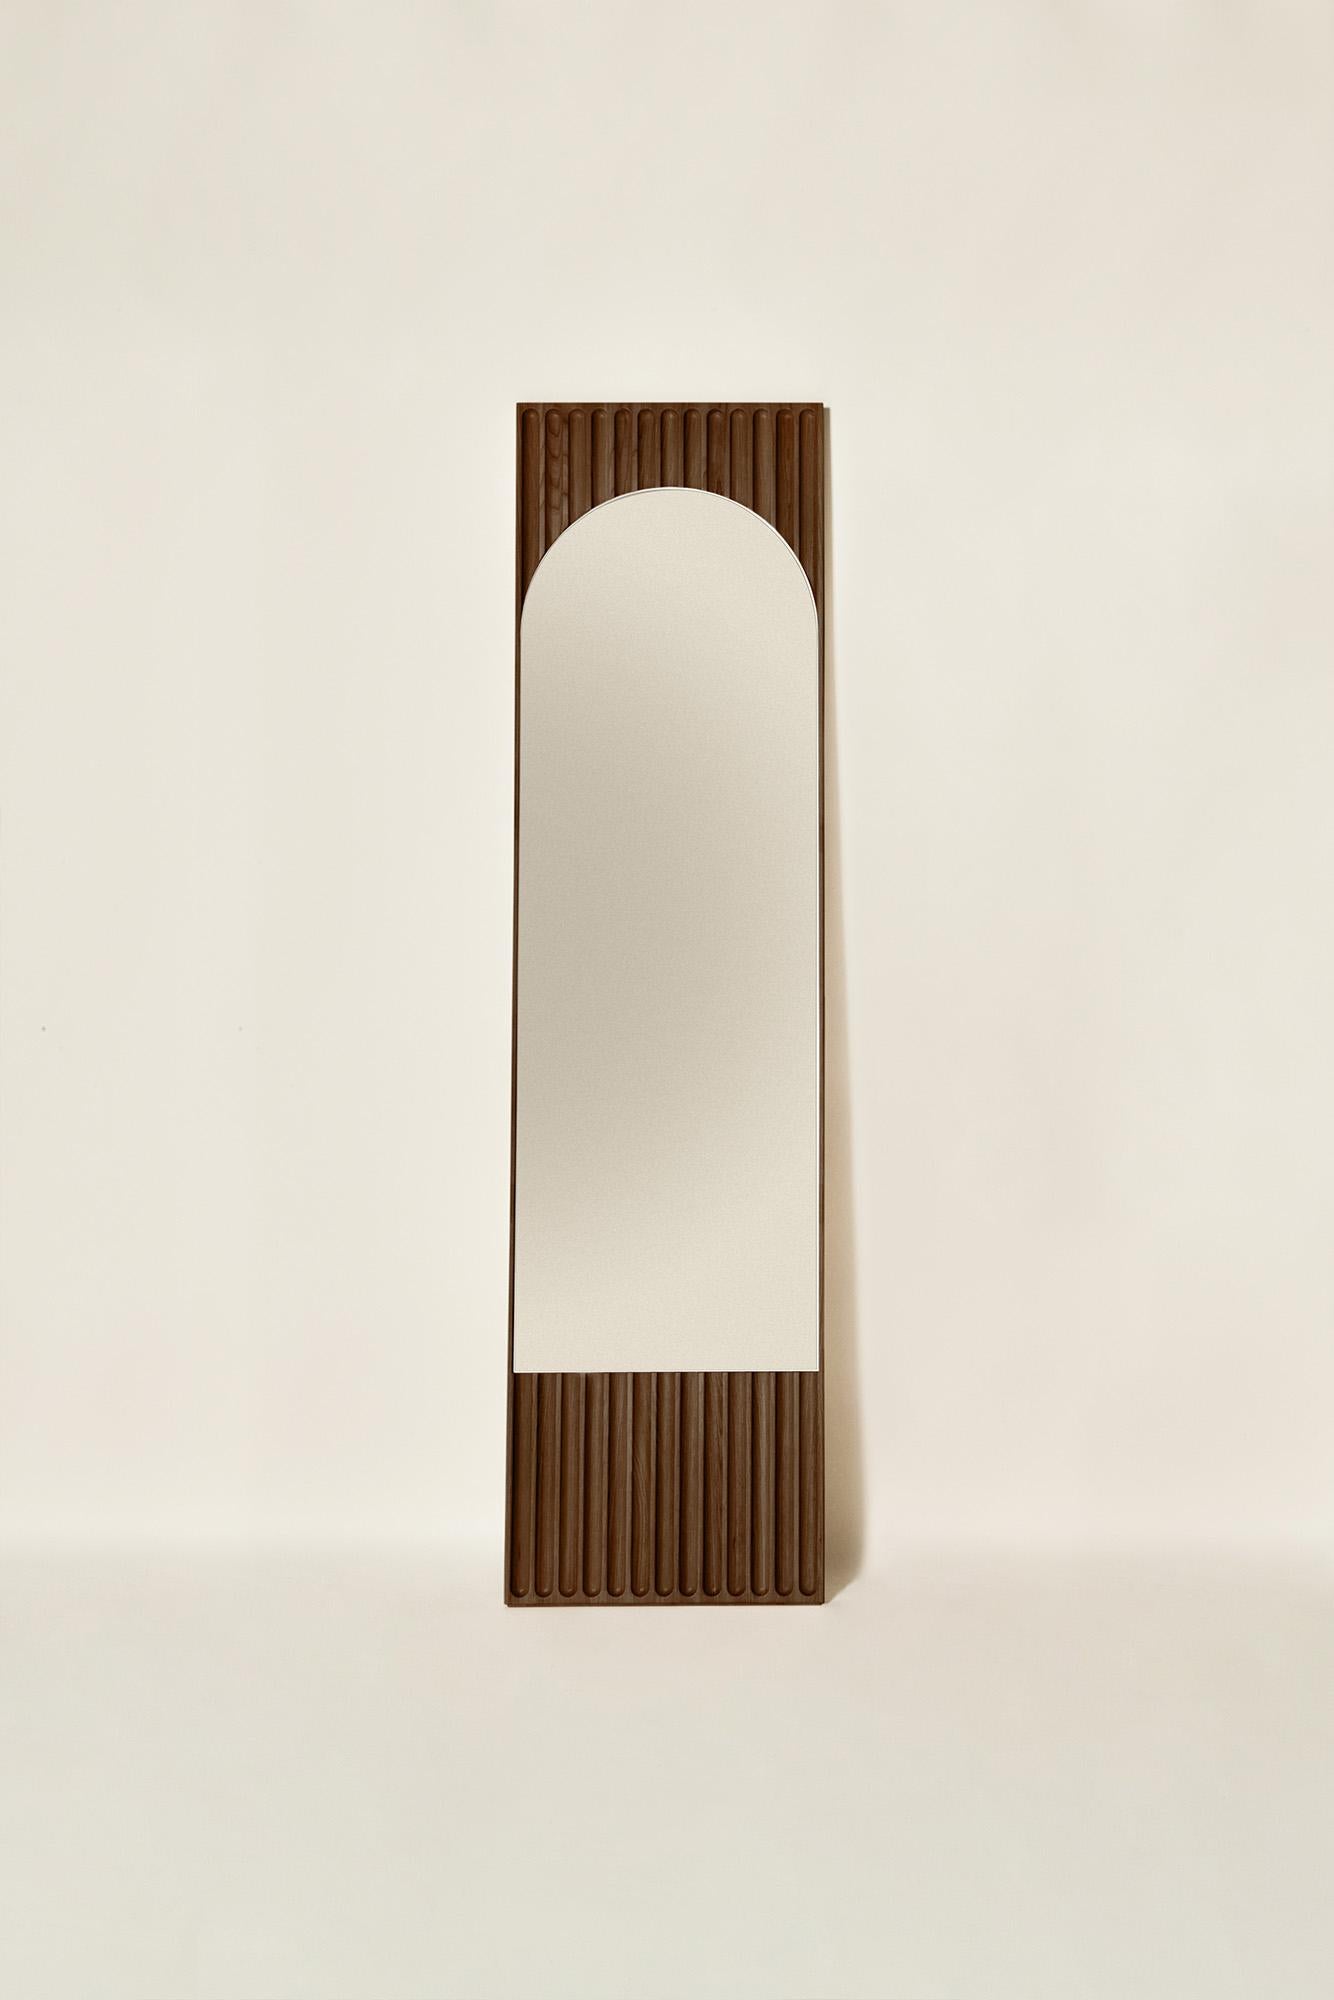 Tutto Sesto Solid Wood Rectangular Mirror, Ash in Natural Finish, Contemporary For Sale 5